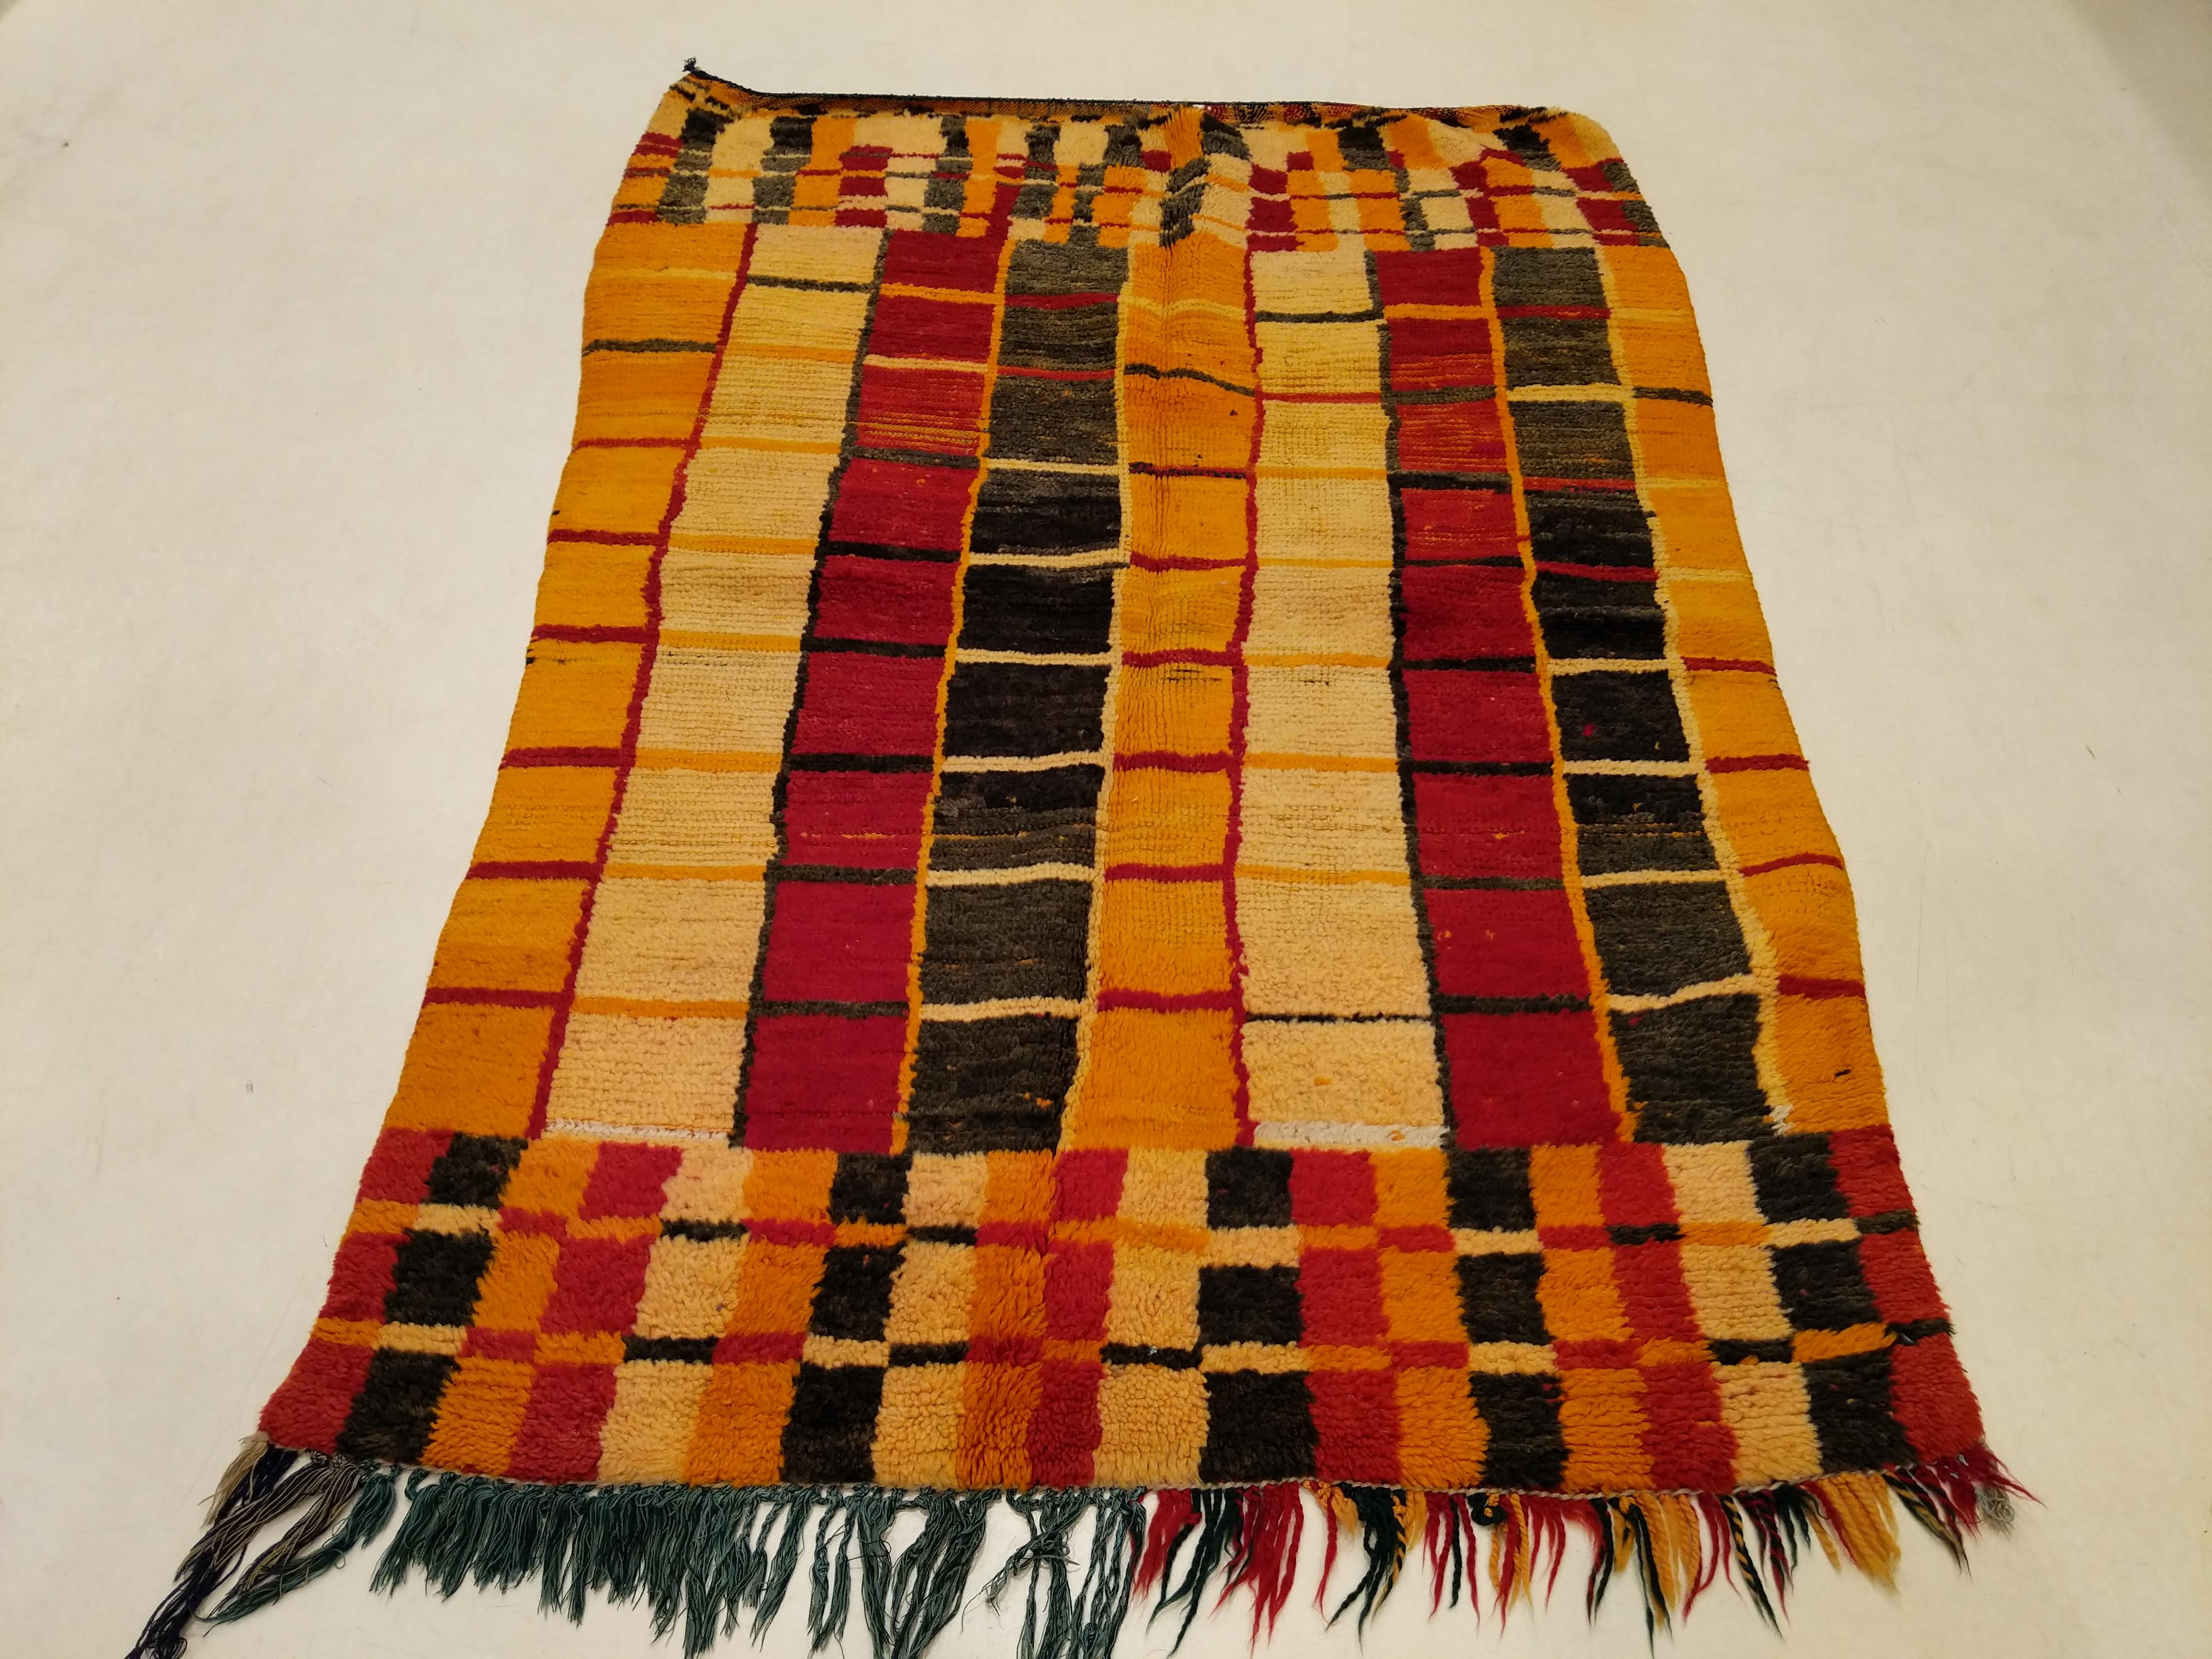 Boujads are woven from Arab tribes and Arabised Berber tribes located on the western foothills of the Middle Atlas, between the towns of Boujad and Beni Mellal. Boujad rugs are among the most colorful representations of Berber woven art. This